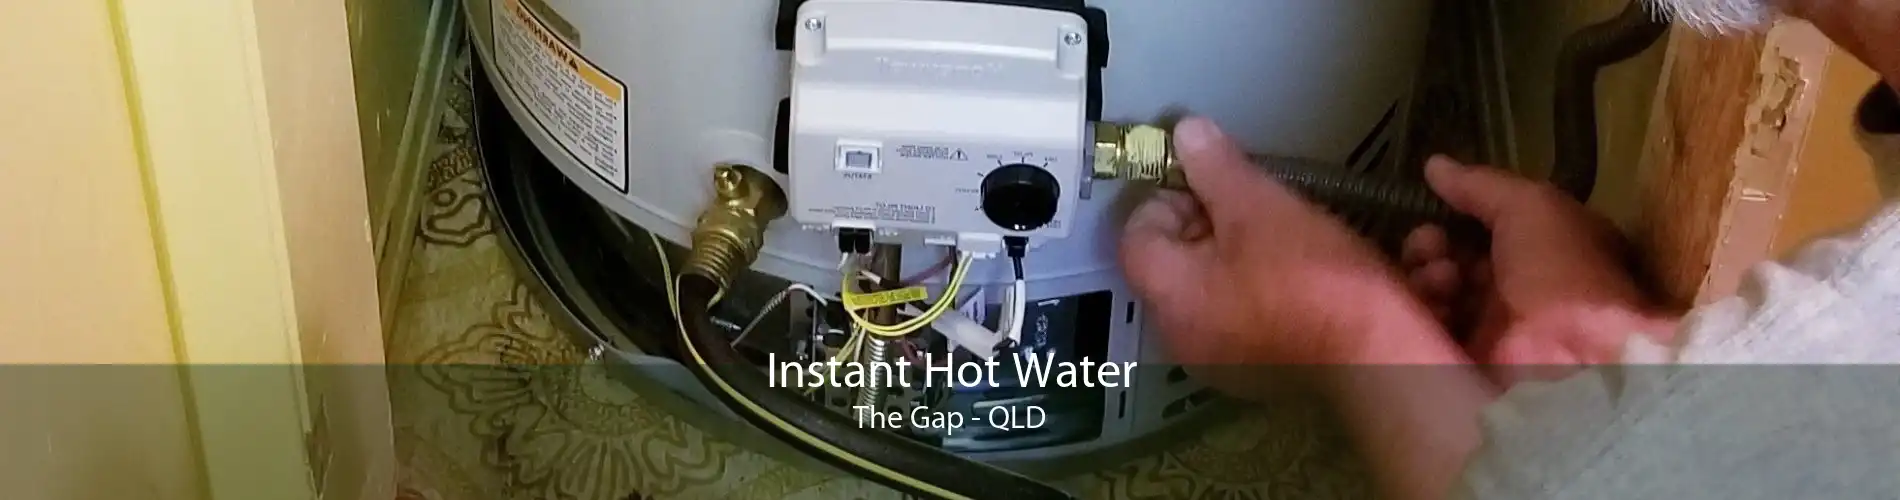 Instant Hot Water The Gap - QLD